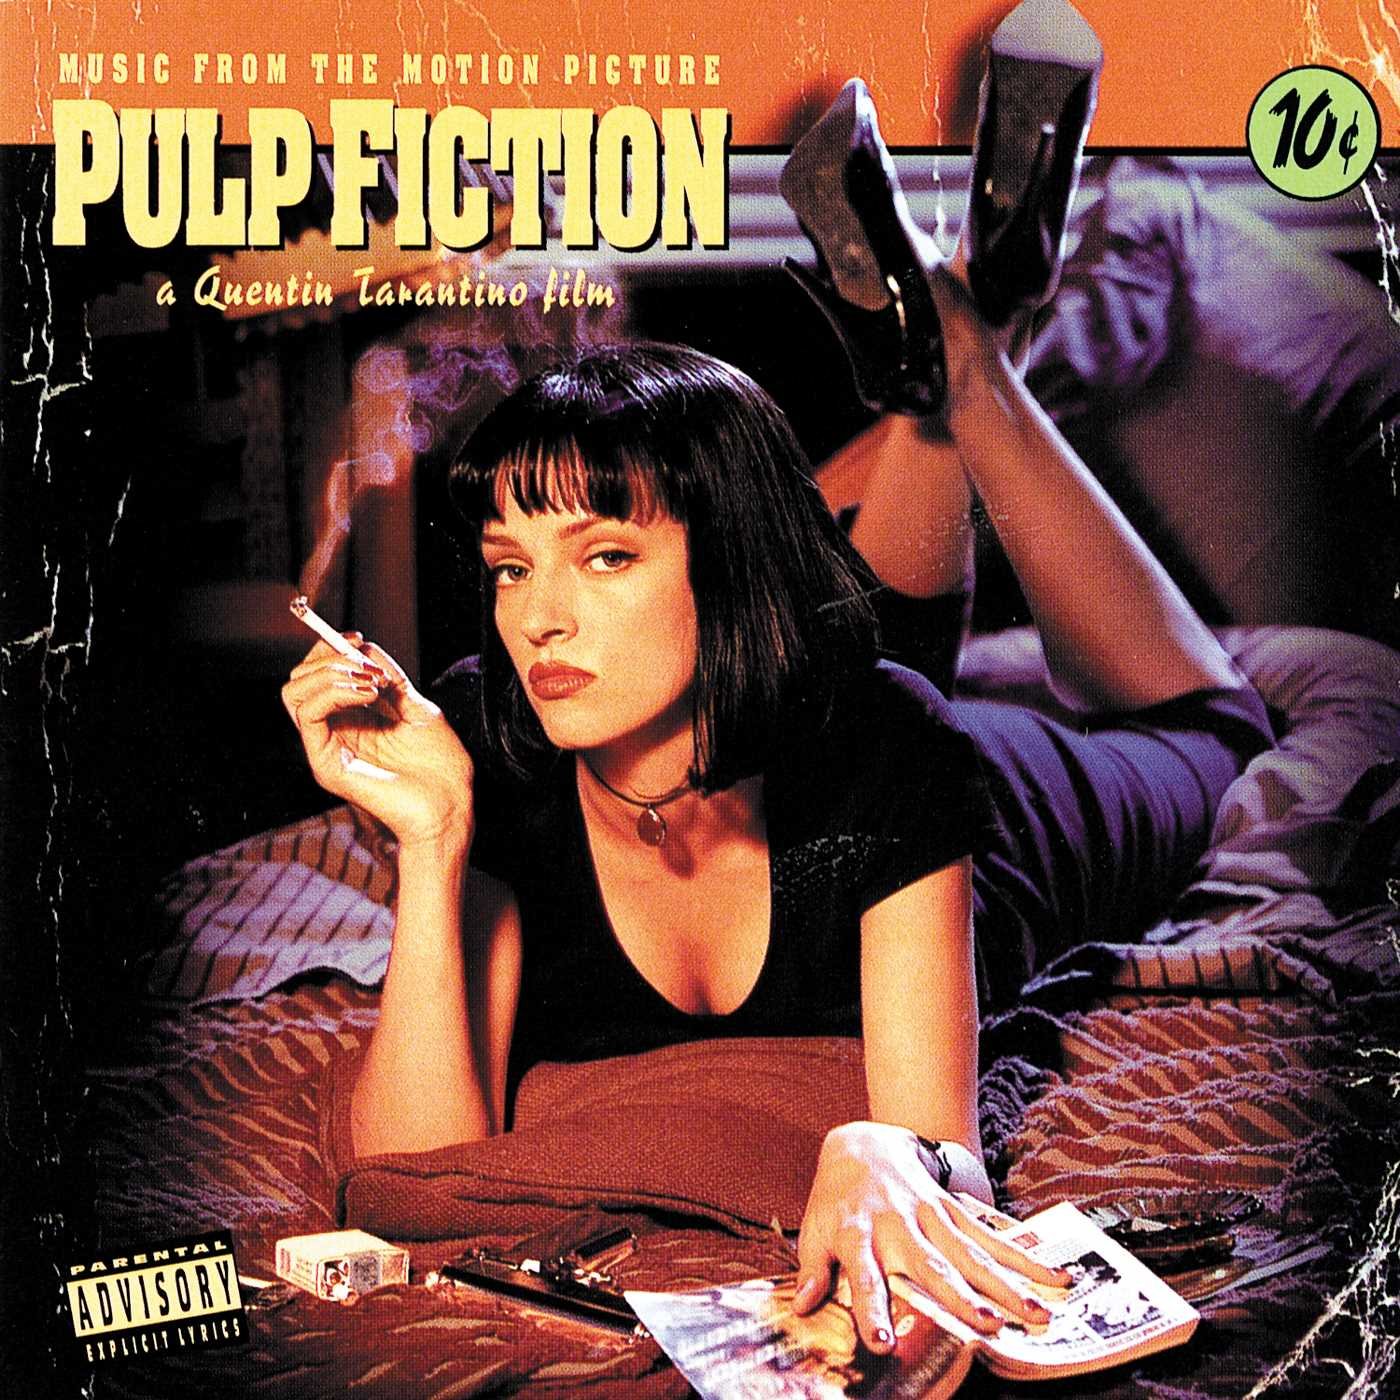 BSO "Pulp Fiction" CD